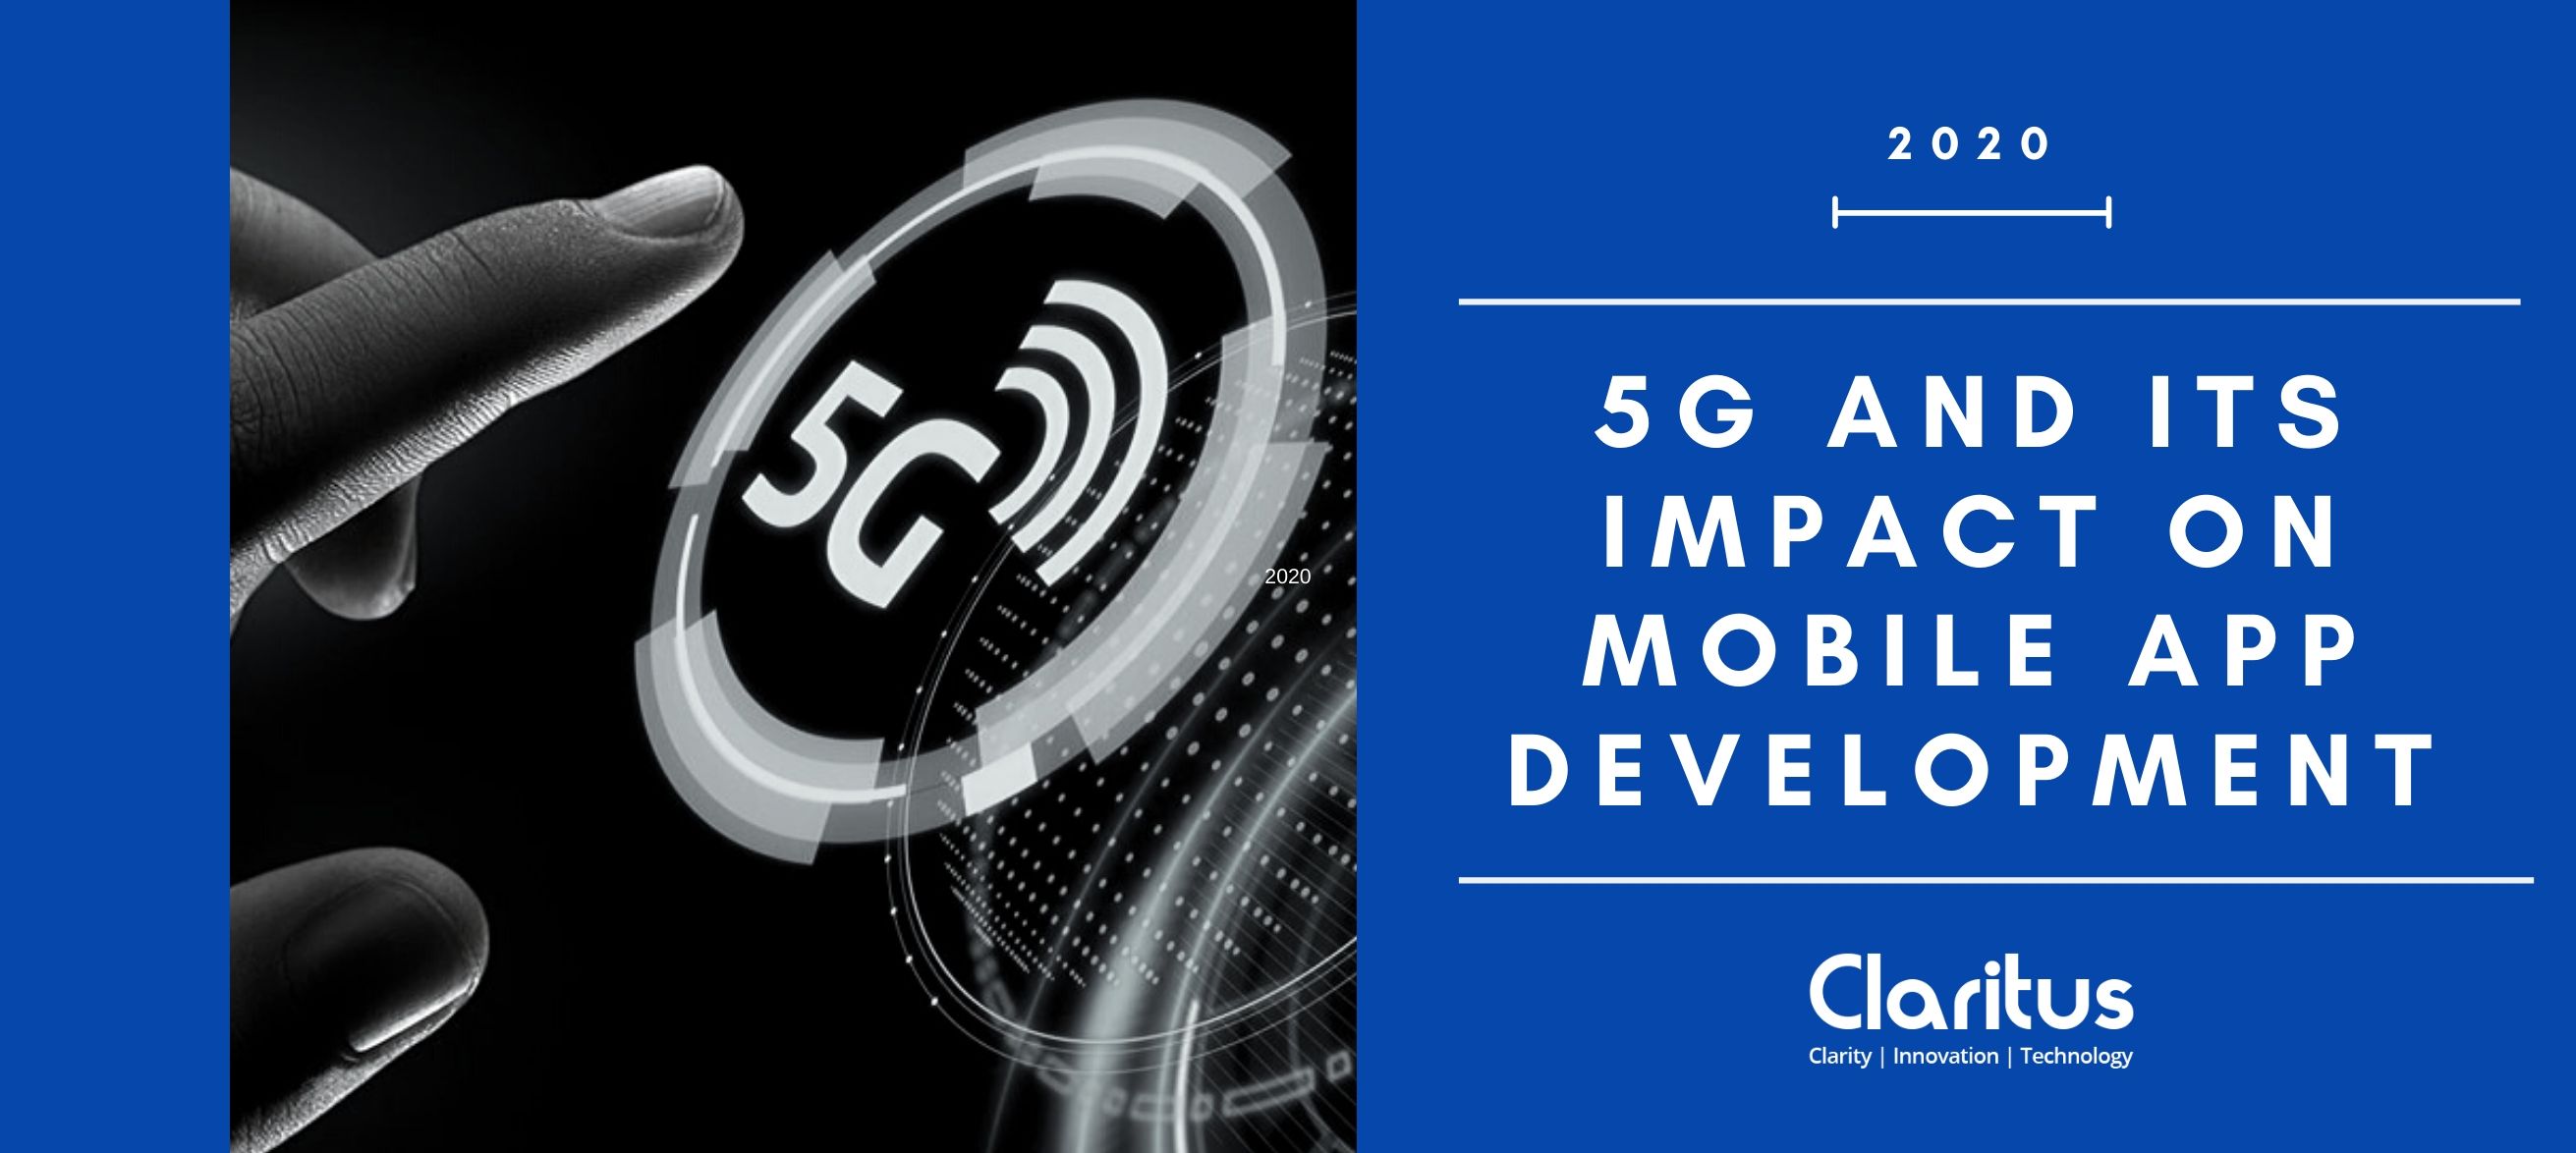 Do You Know How 5G Will Impact Mobile App Development in 2020